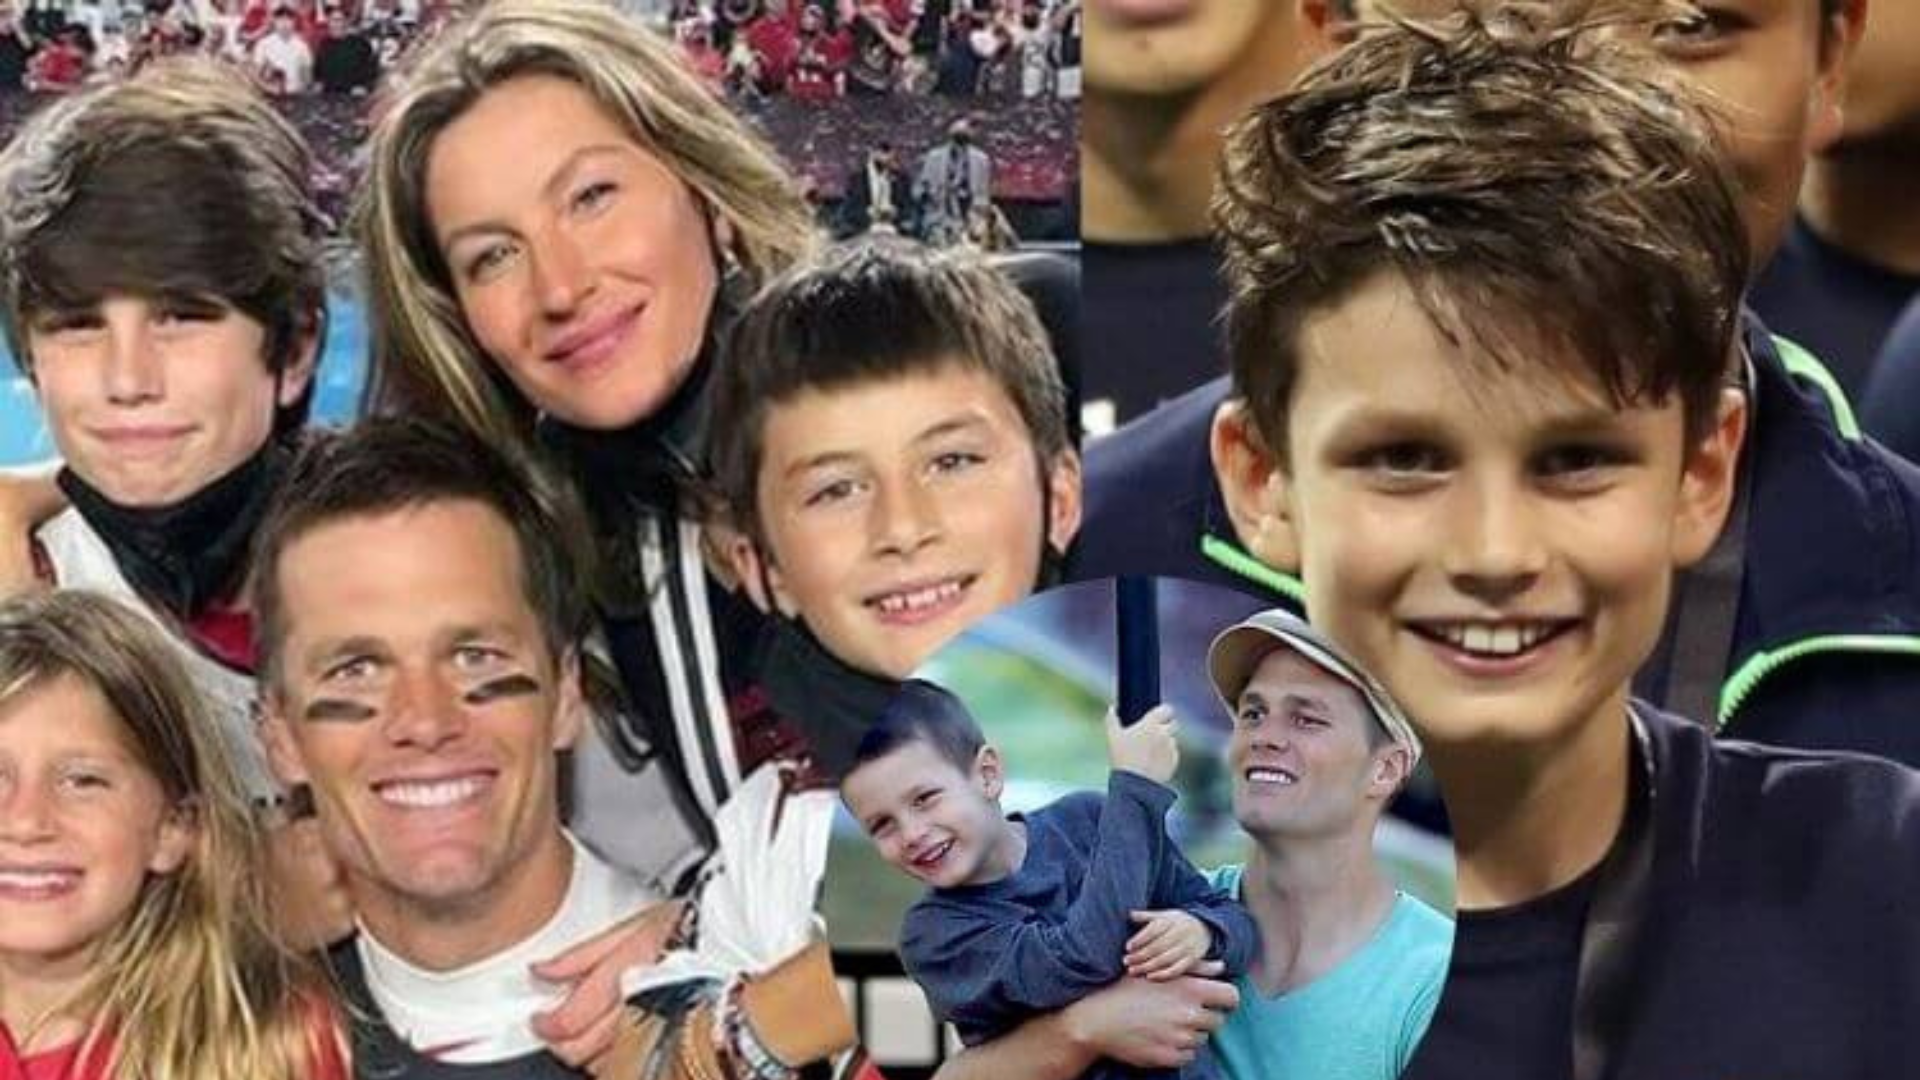 John Edward happily together with his family with his dad Tom Brady carrying him